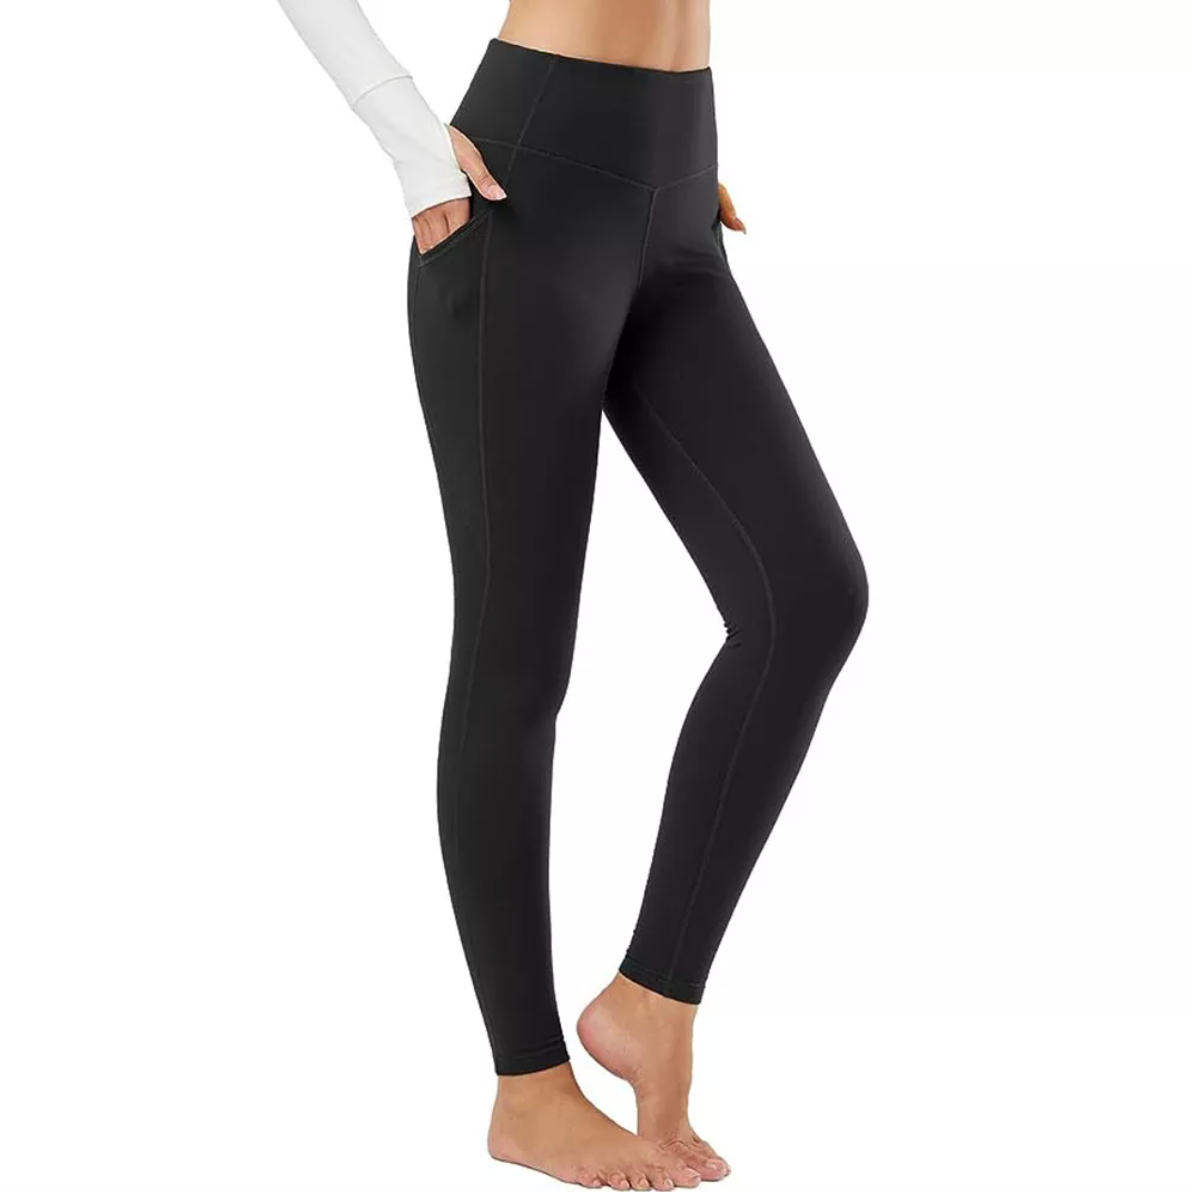 s Best-Selling Fleece-Lined Leggings Are On Sale to Keep